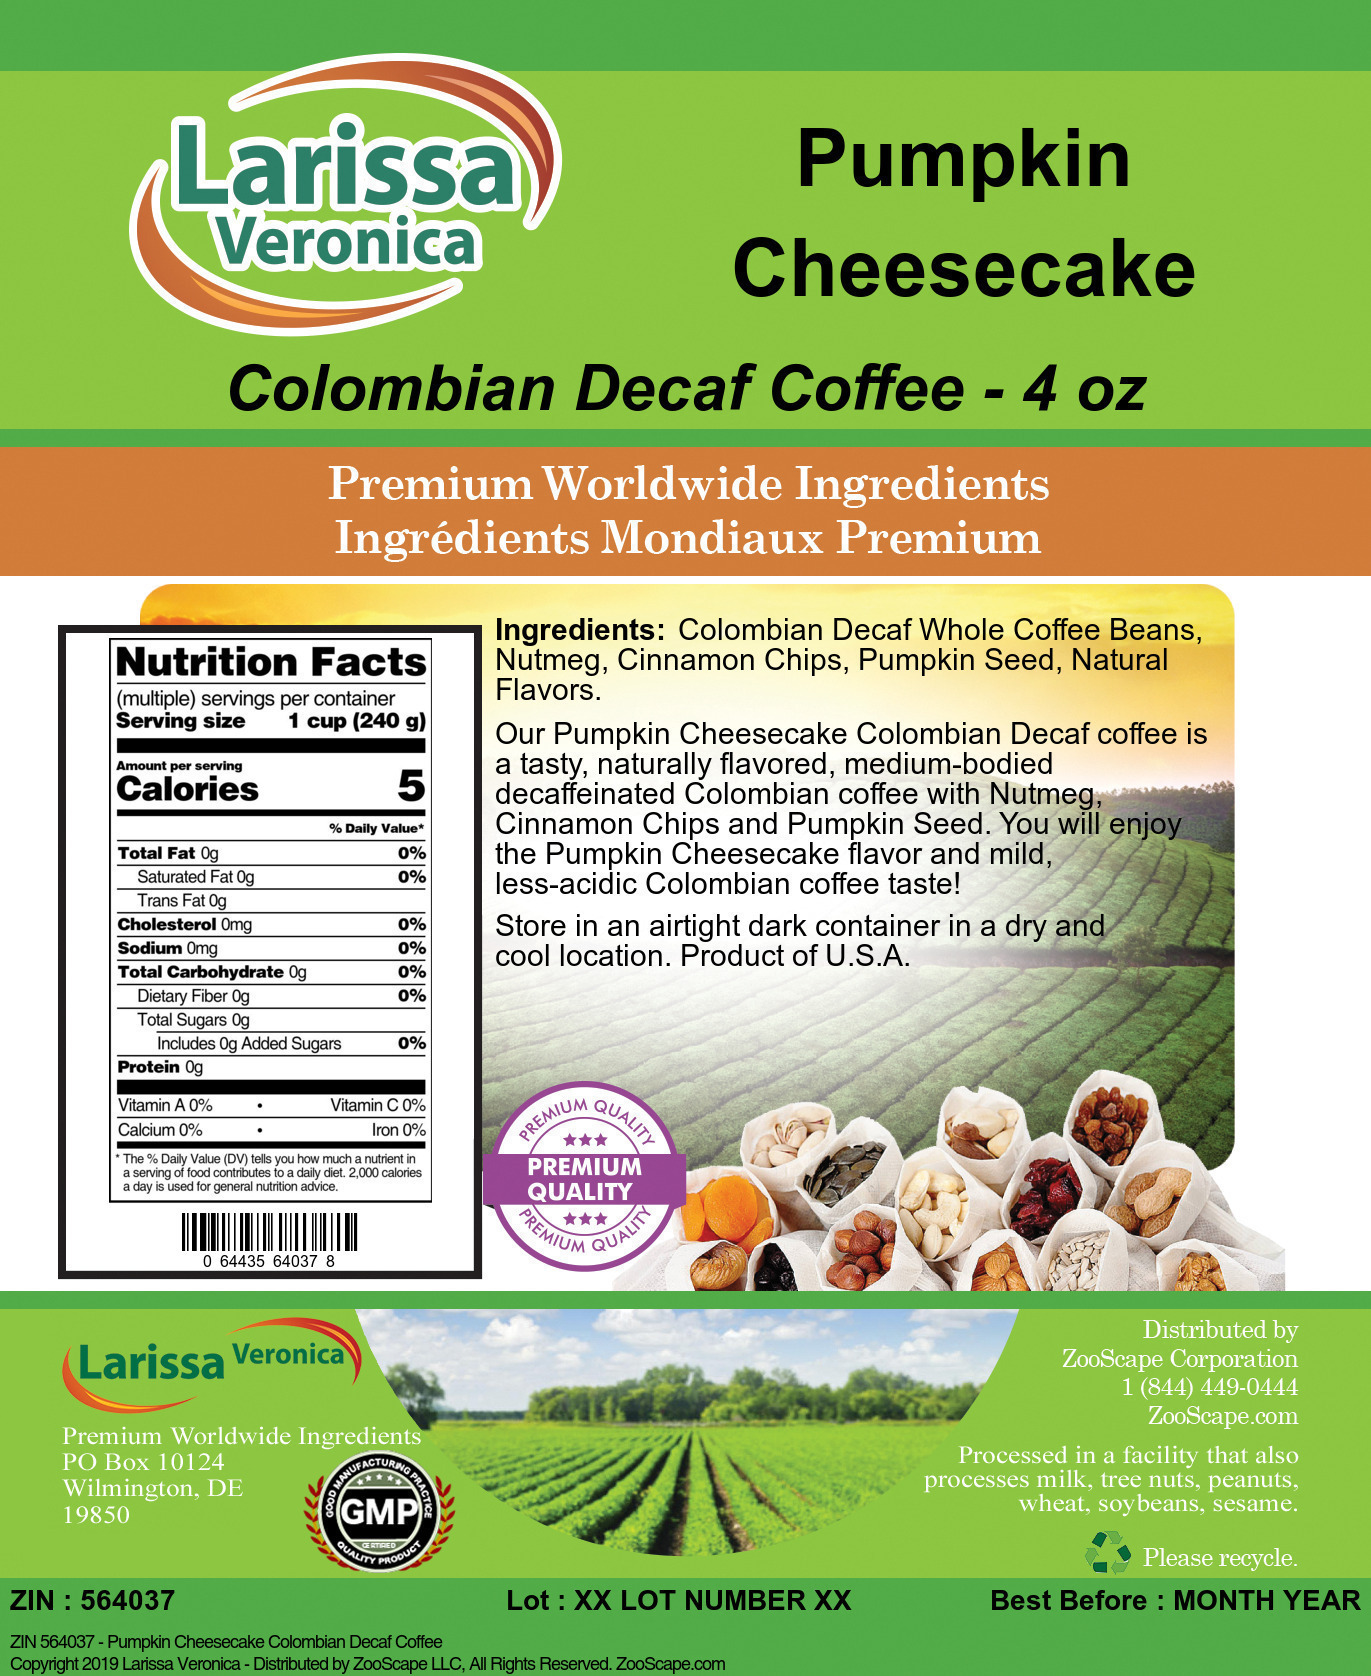 Pumpkin Cheesecake Colombian Decaf Coffee - Label